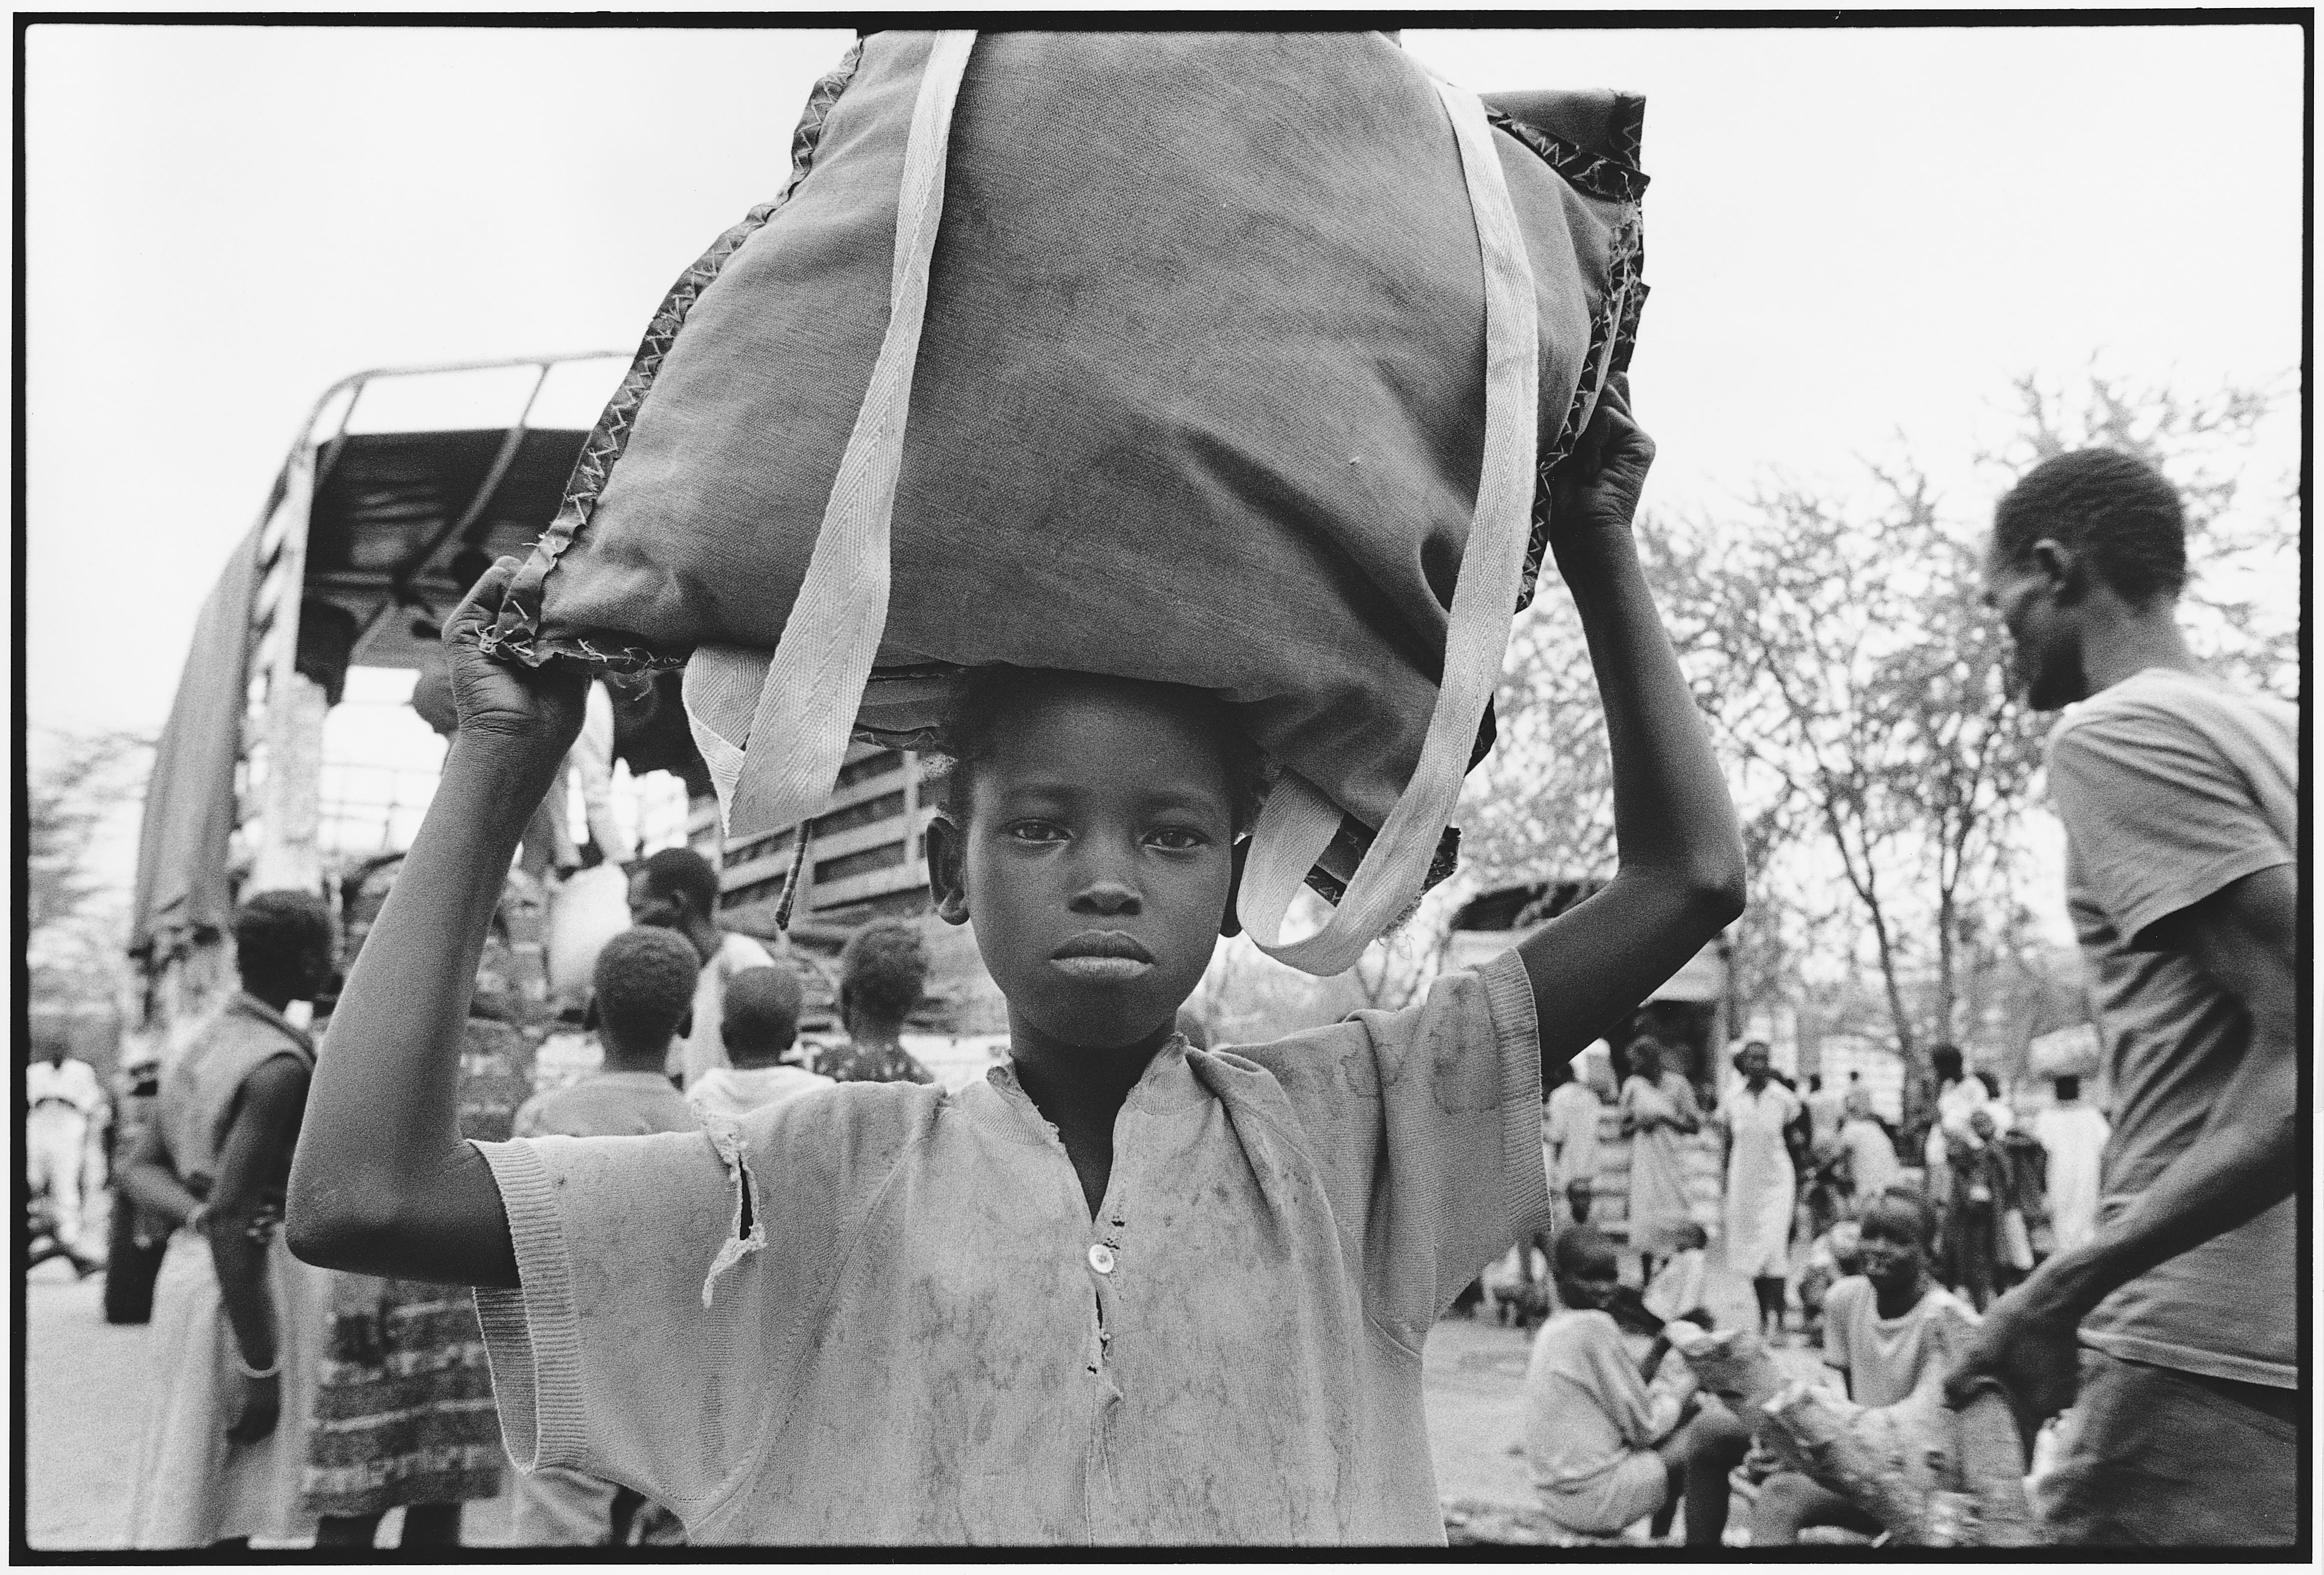 Credit: UNHCR/B.Press Caption: A young Dinka boy arriving in Kenya in 1992. Determined to get an education, many of the "Lost Boys" carried books with them across hundreds of miles of desert.